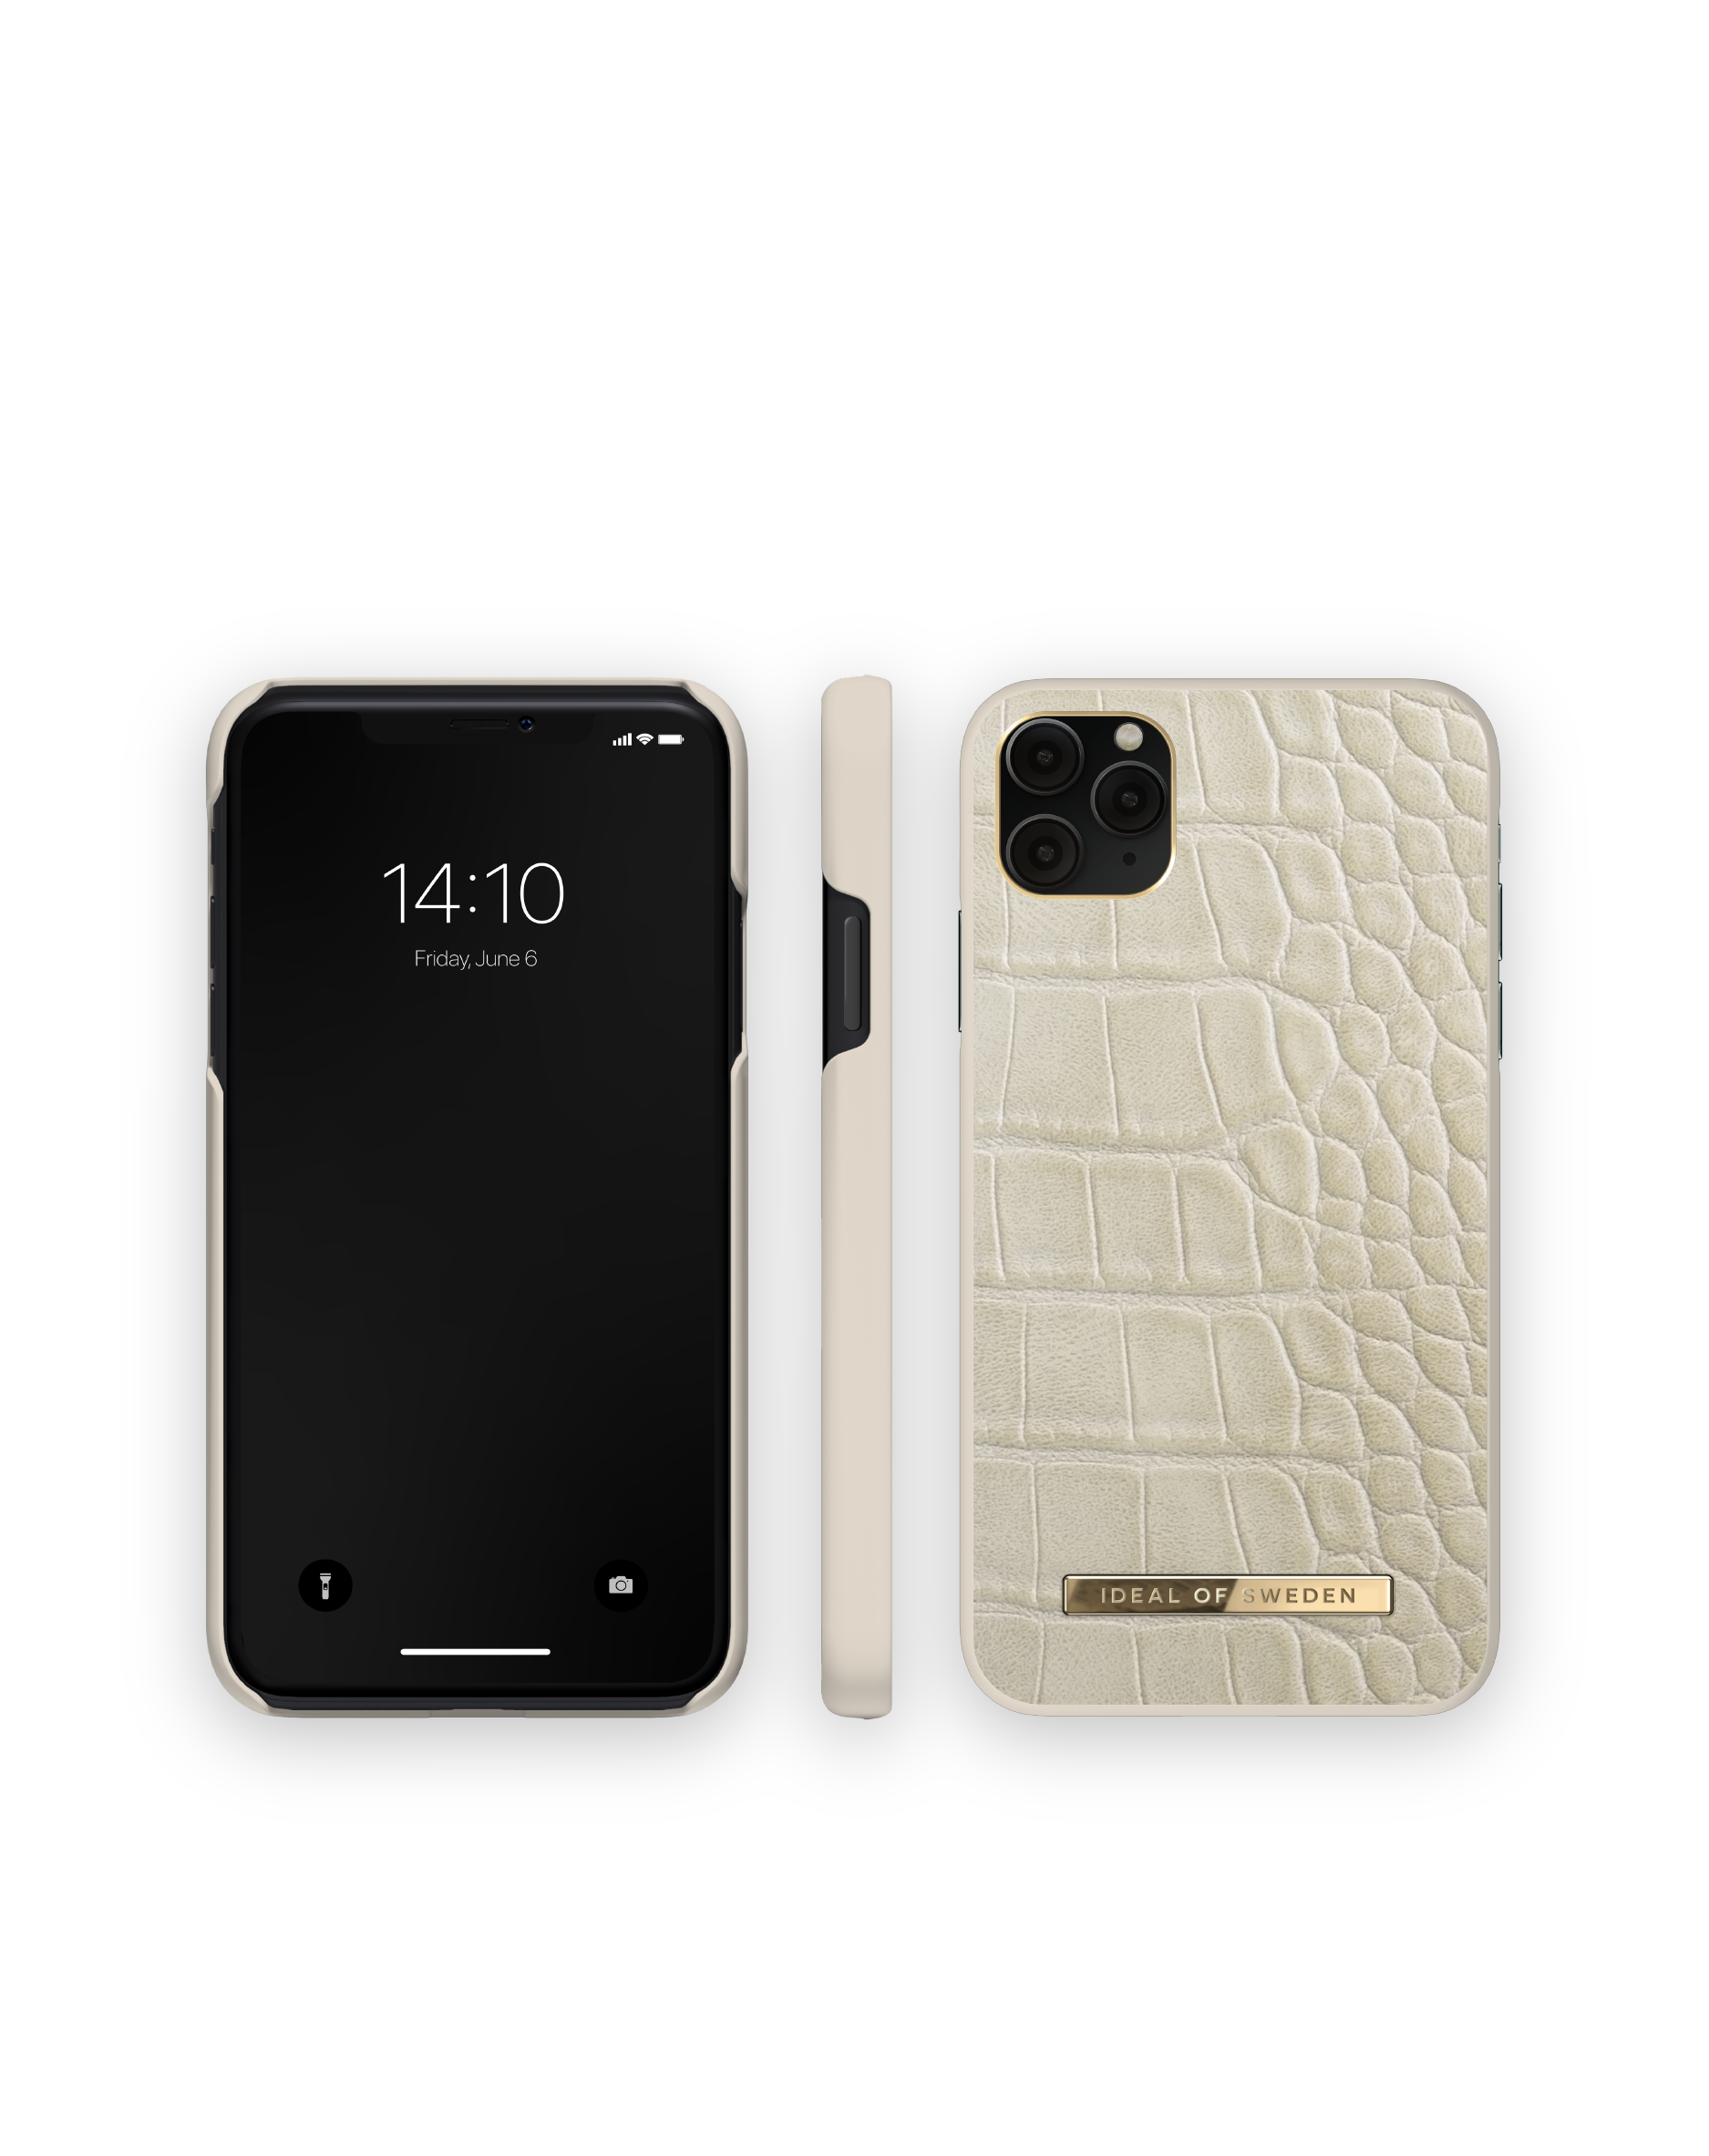 IDEAL OF SWEDEN XS Backcover, Croco Apple IDACAW20-1965-243, Caramel Max, Pro Max, 11 Apple iPhone Apple, iPhone